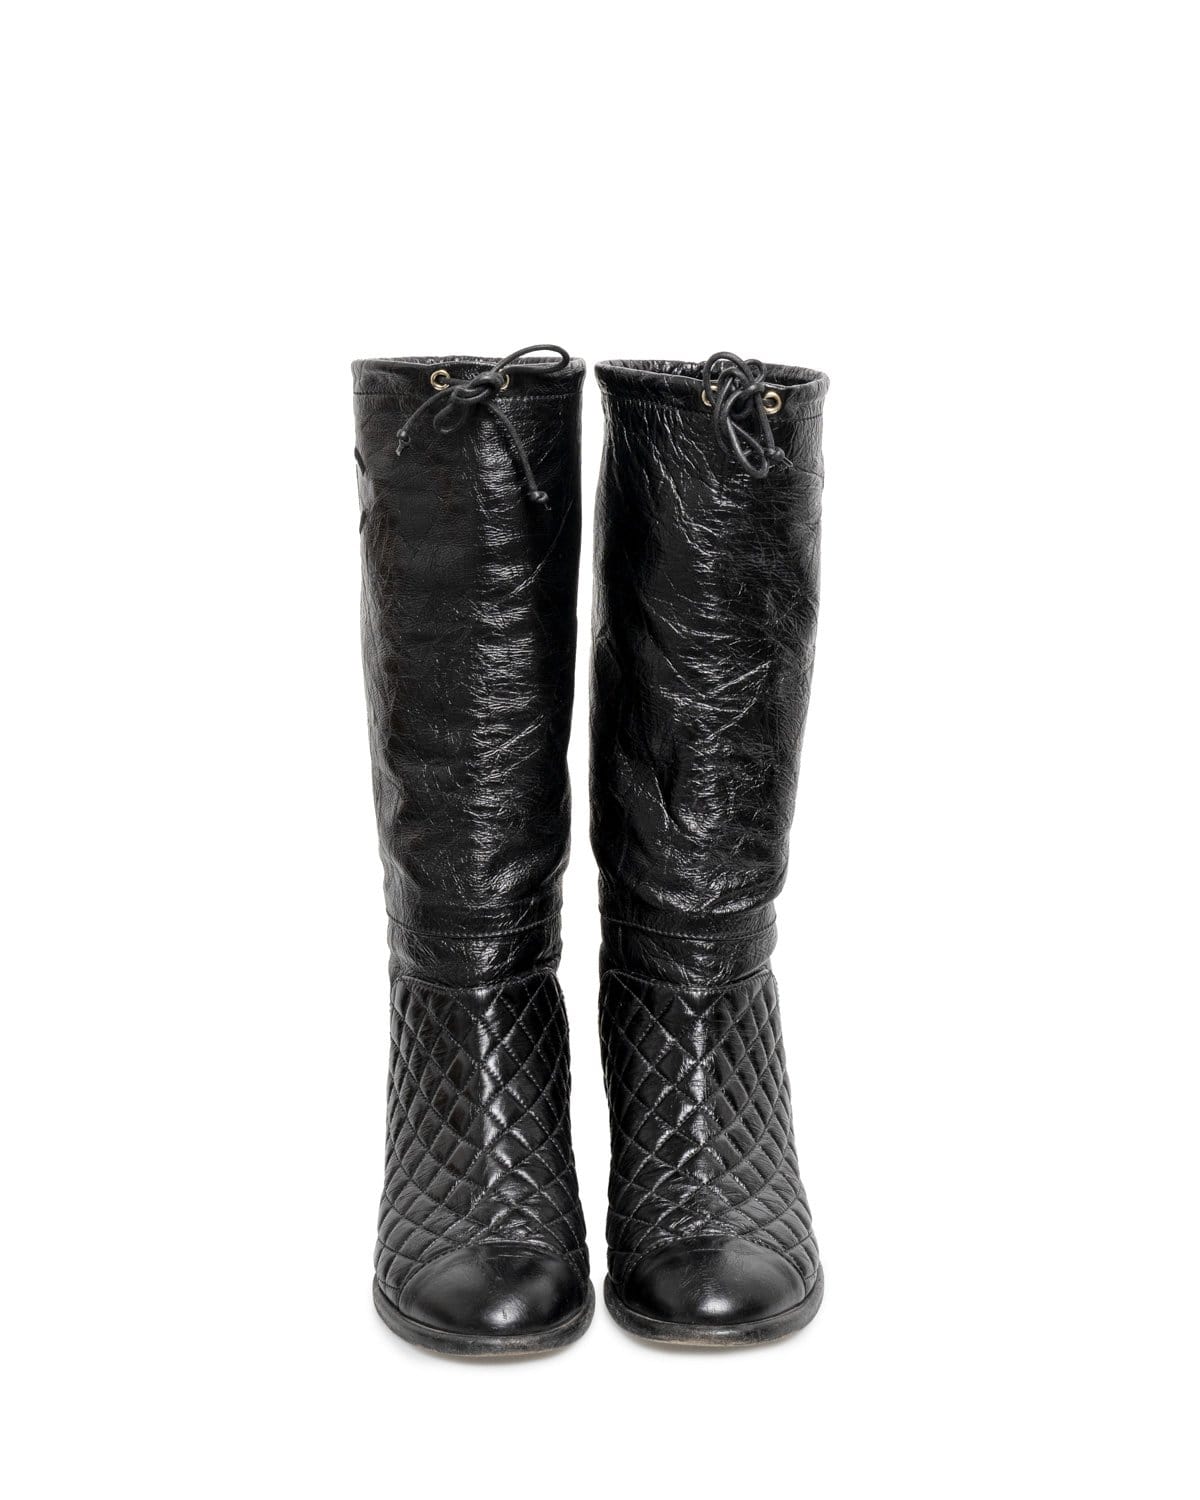 Chanel Chanel Boots Size 40 Patent - ADL1596